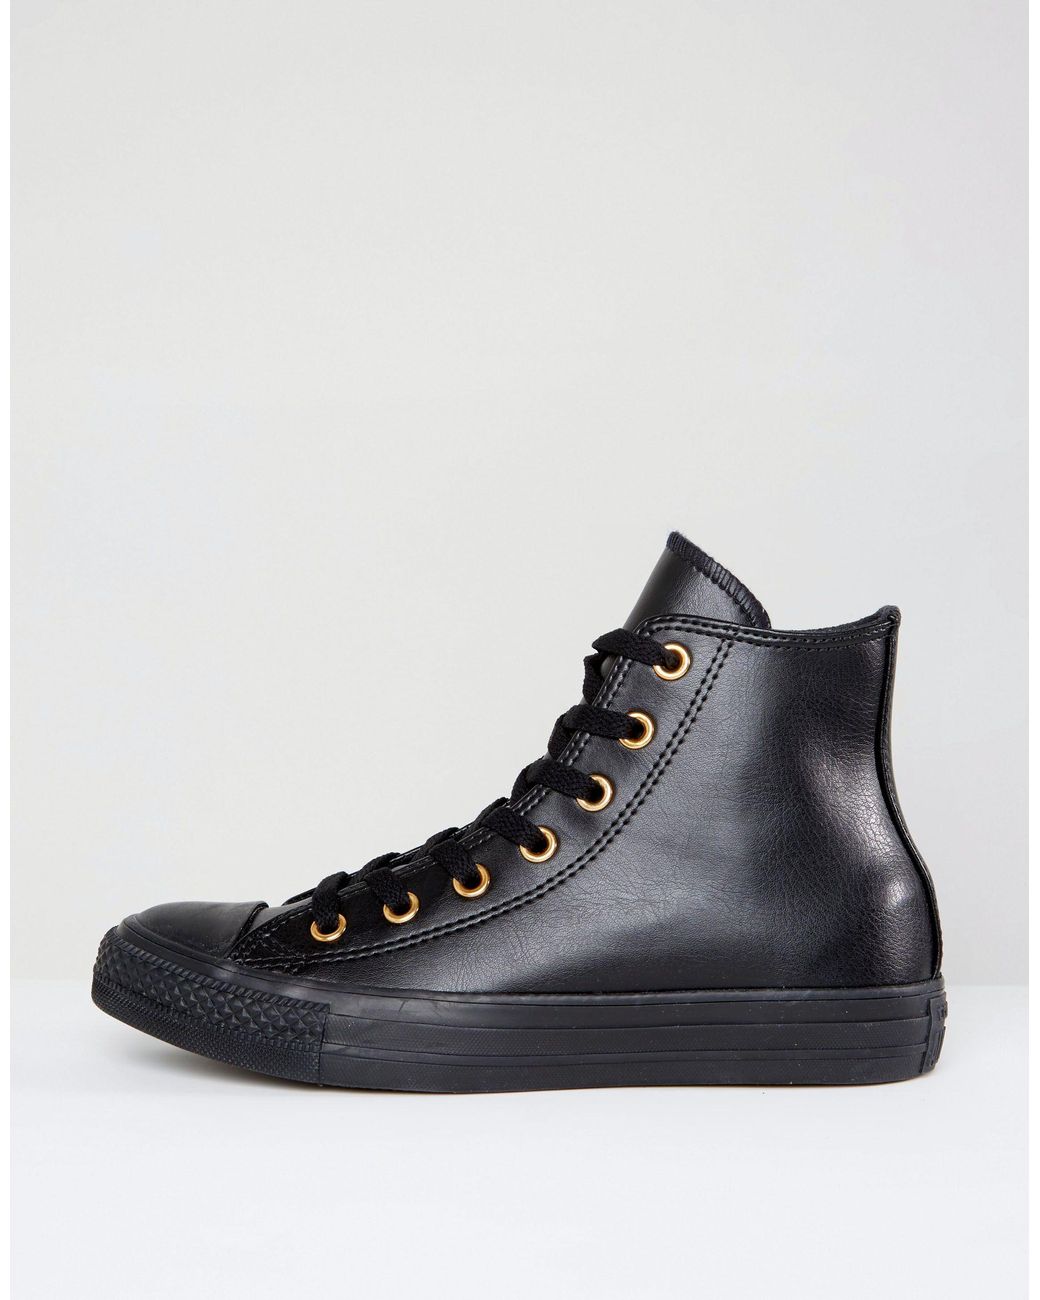 Converse Chuck Taylor Top Sneakers Black With Eyelets | Lyst